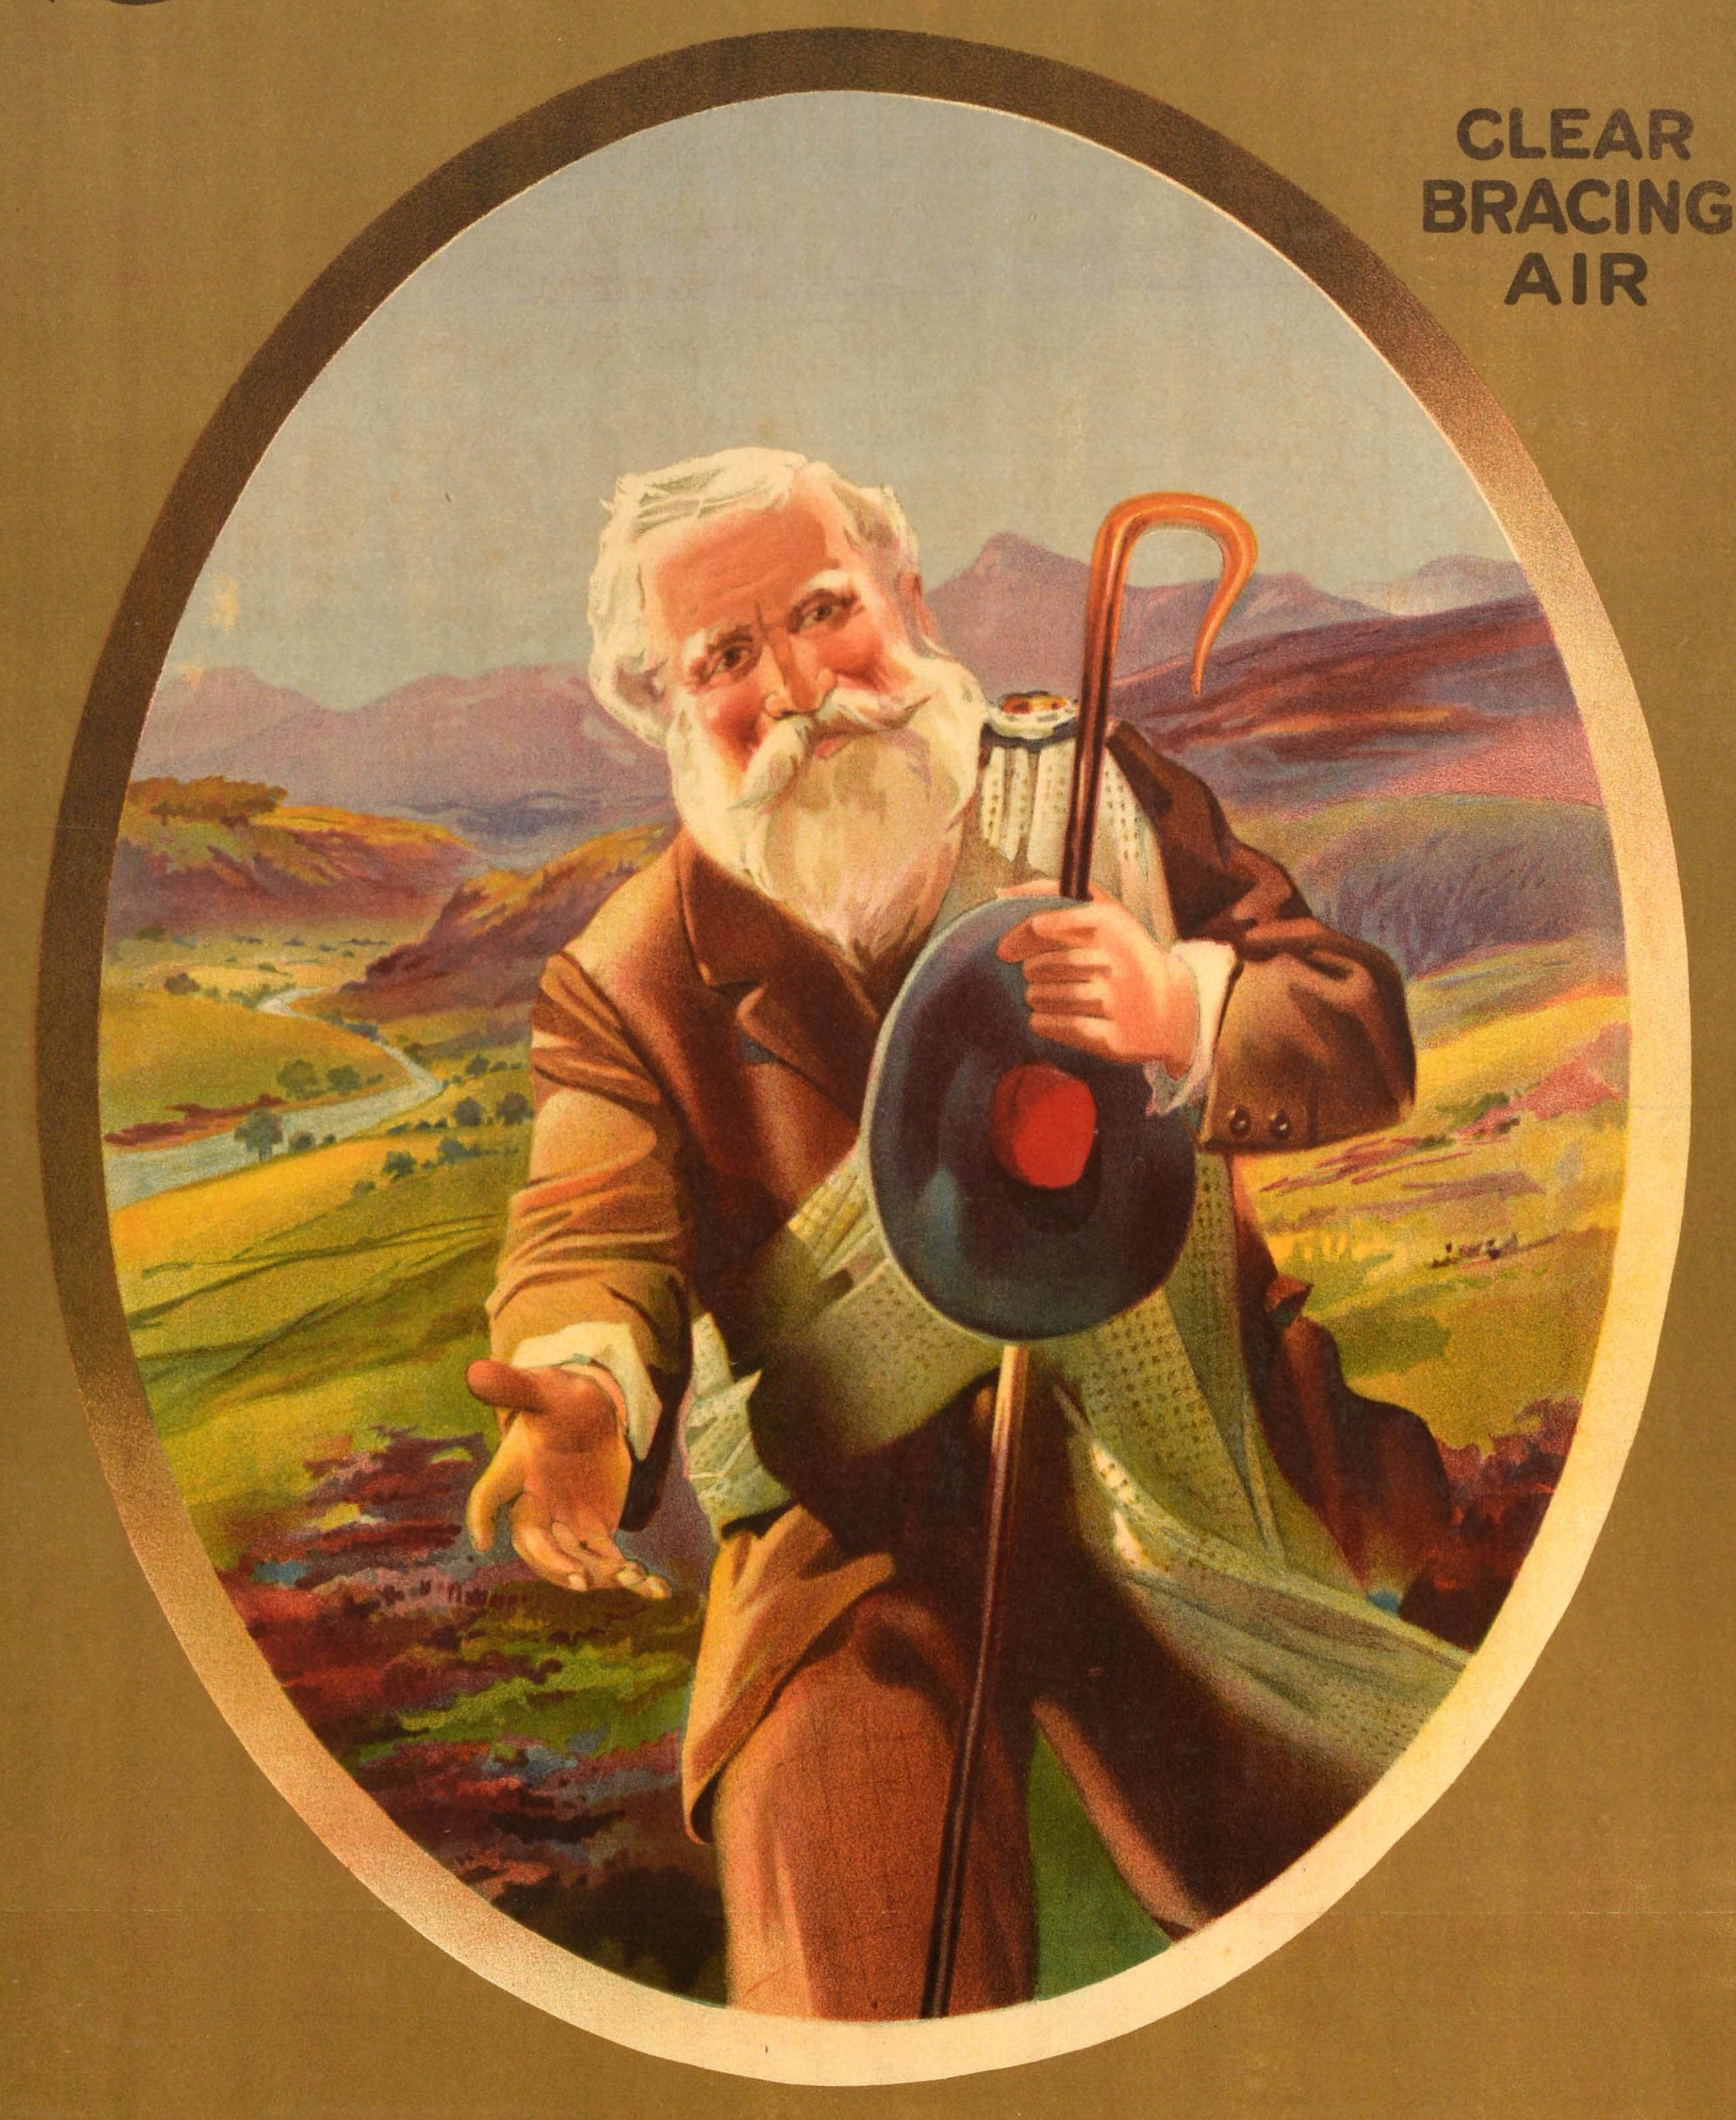 Original antique train travel poster - Come To Scotland For Your Holidays By The West Coast Route London & North Western & Caledonian Railways - featuring an illustration of a bearded gentleman holding his hat and a walking stick in one hand and